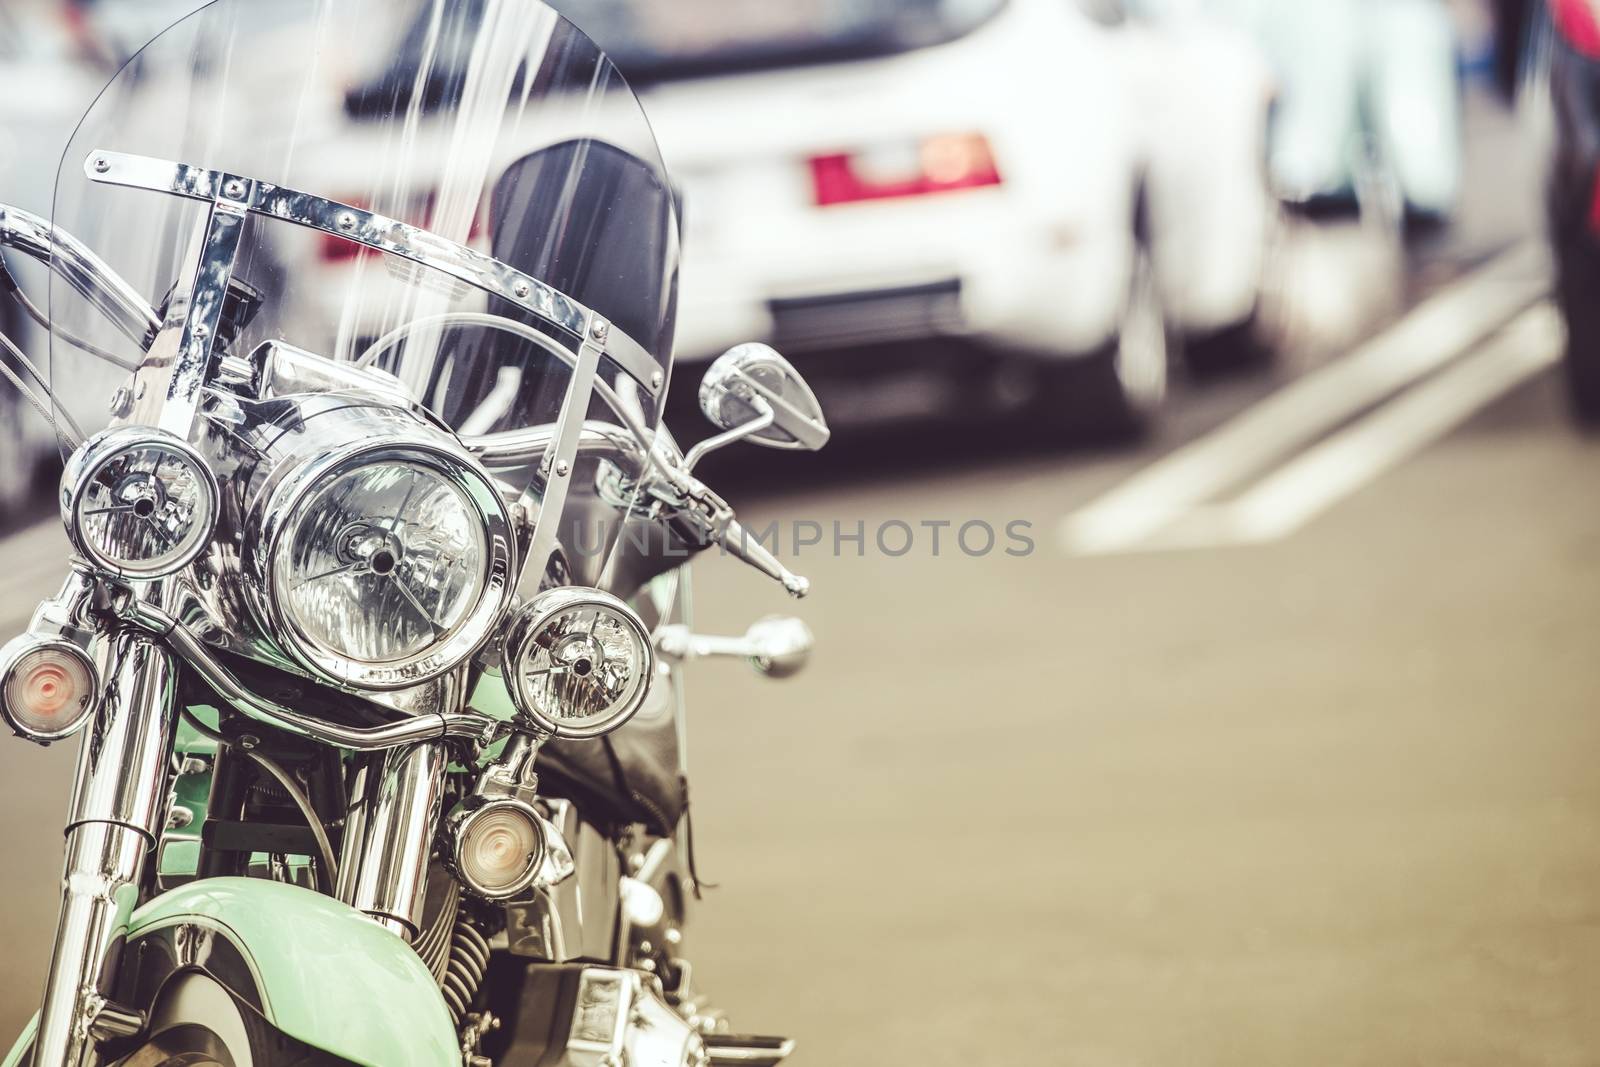 Classic Motorcycle on the Parking Spot. Closeup Photo.